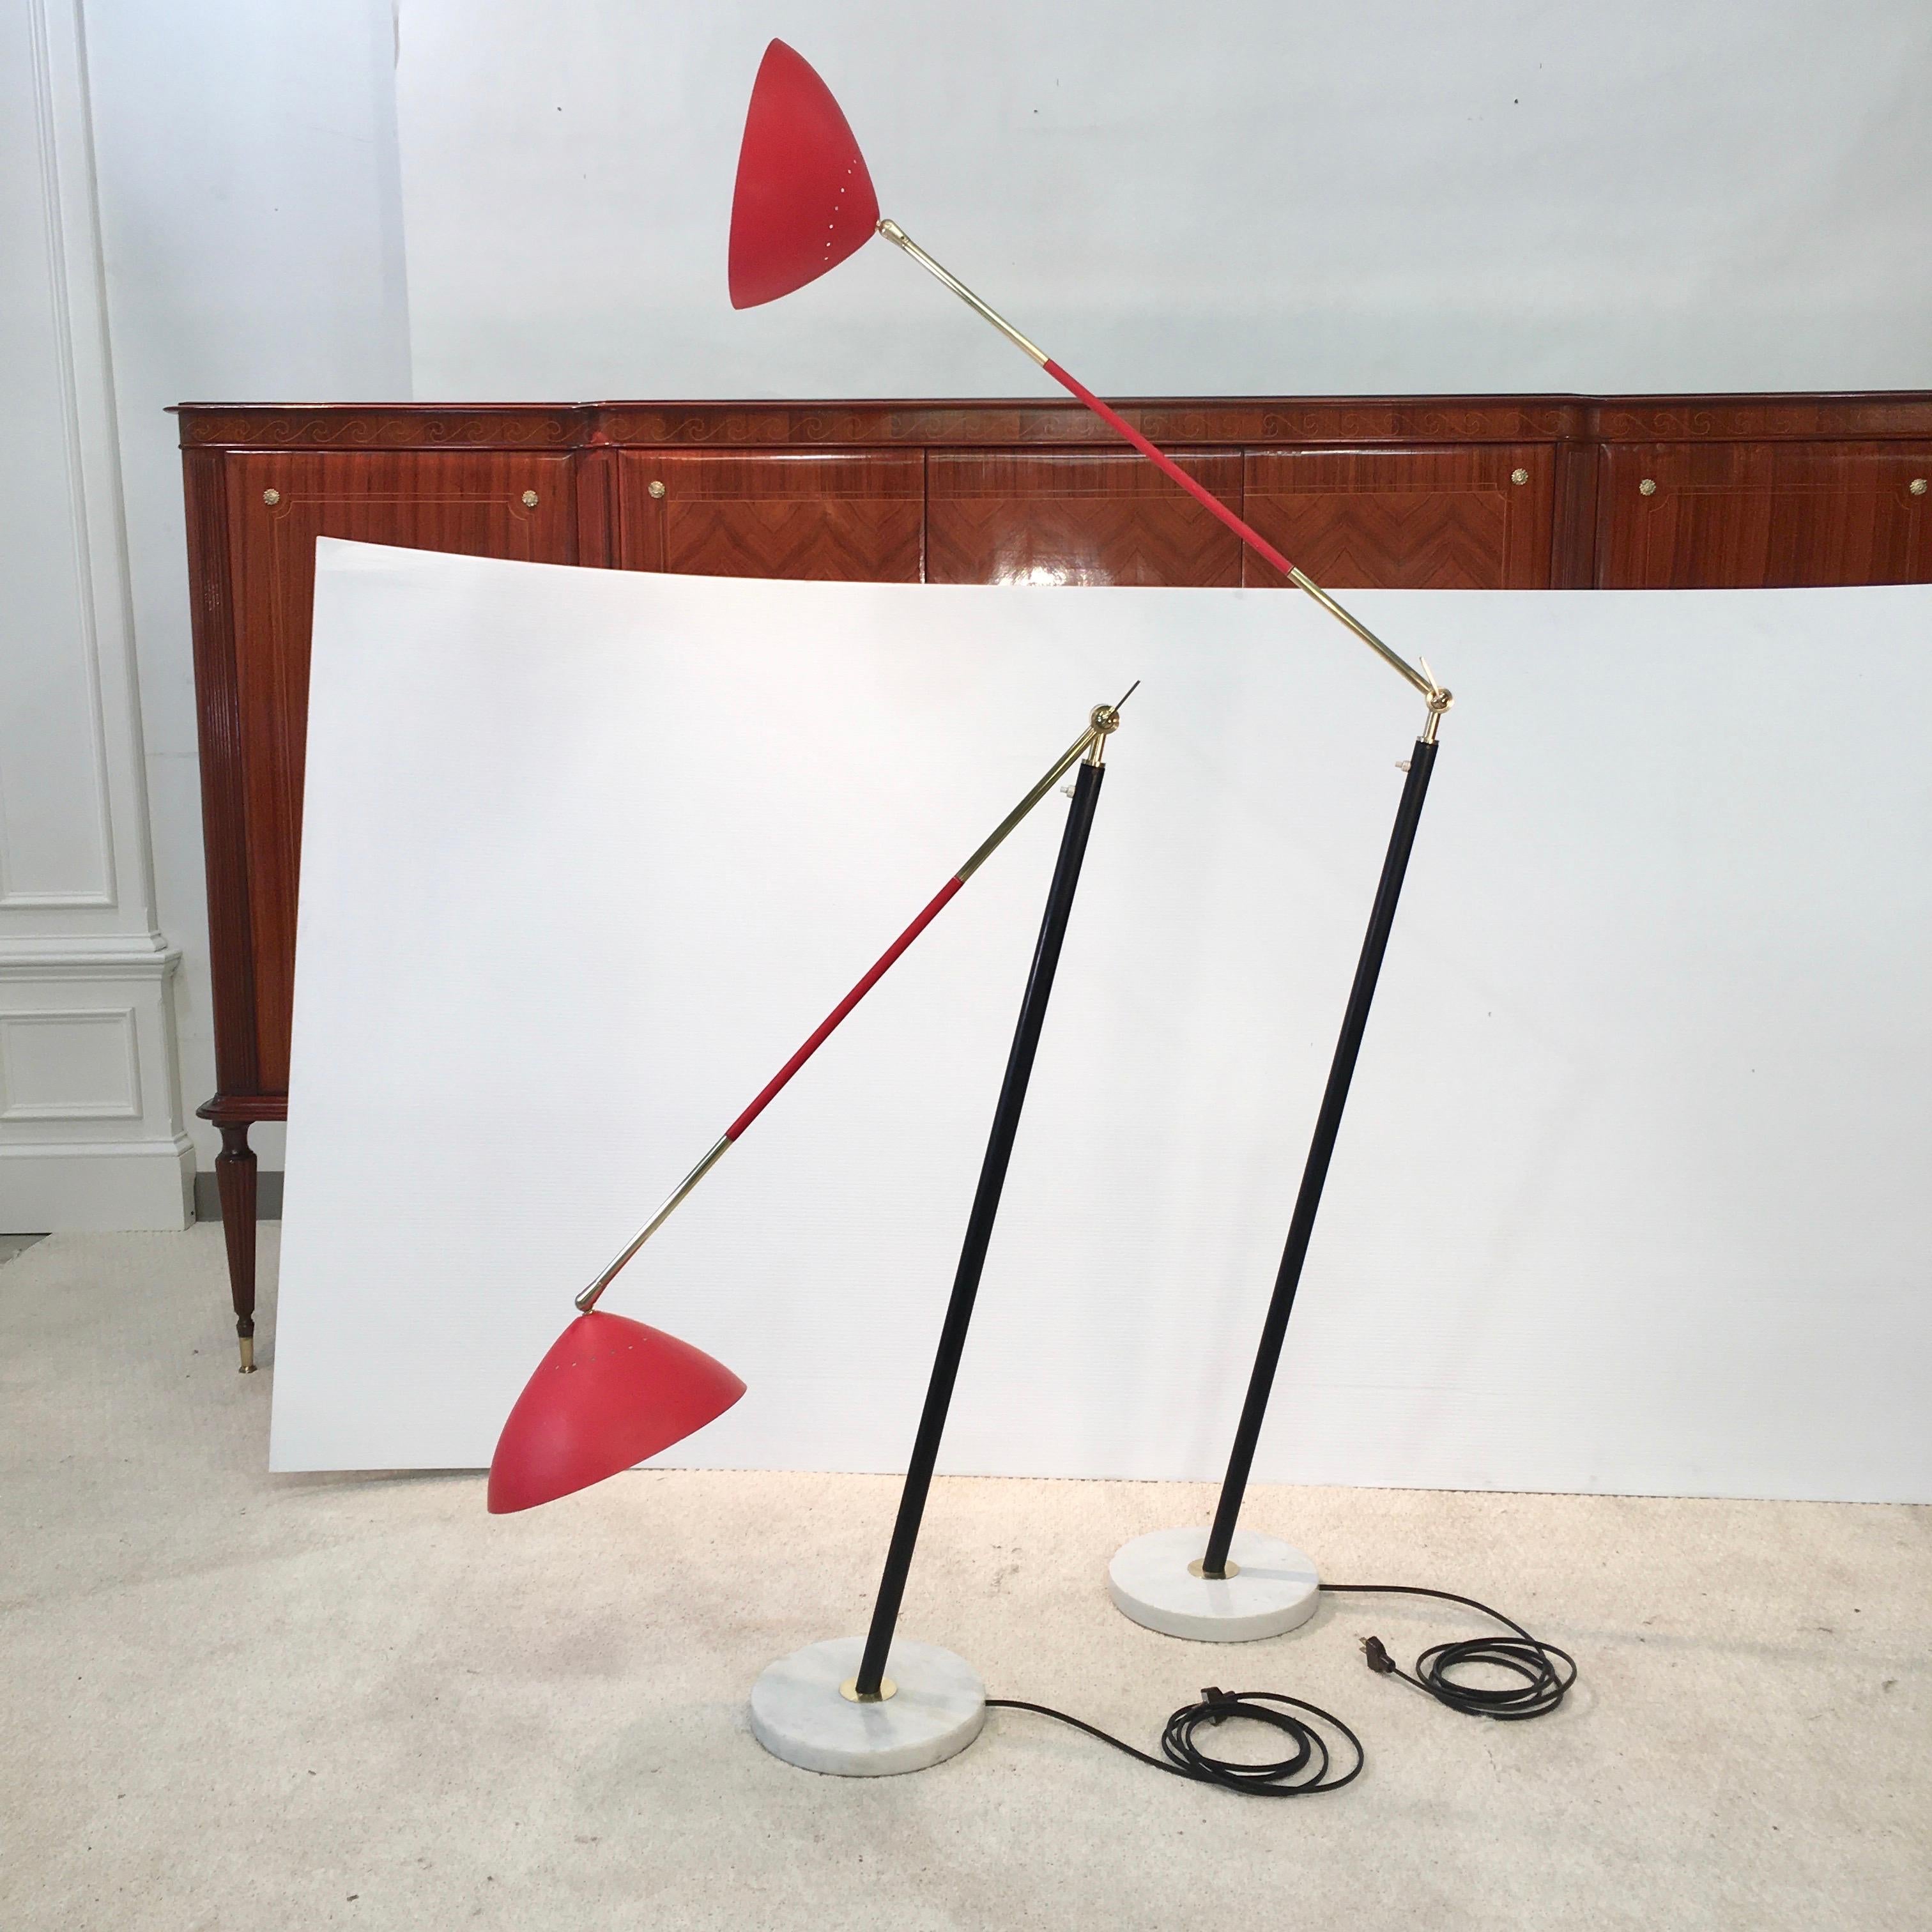 Matched pair of floor lamps by Stilux Milano designed by Oscar Torlasco with red shades, black enameled metal stem, brass arms and mounts. Articulating stem and shade with a white round marble base. Push button switch on stem. Iconic and playfully